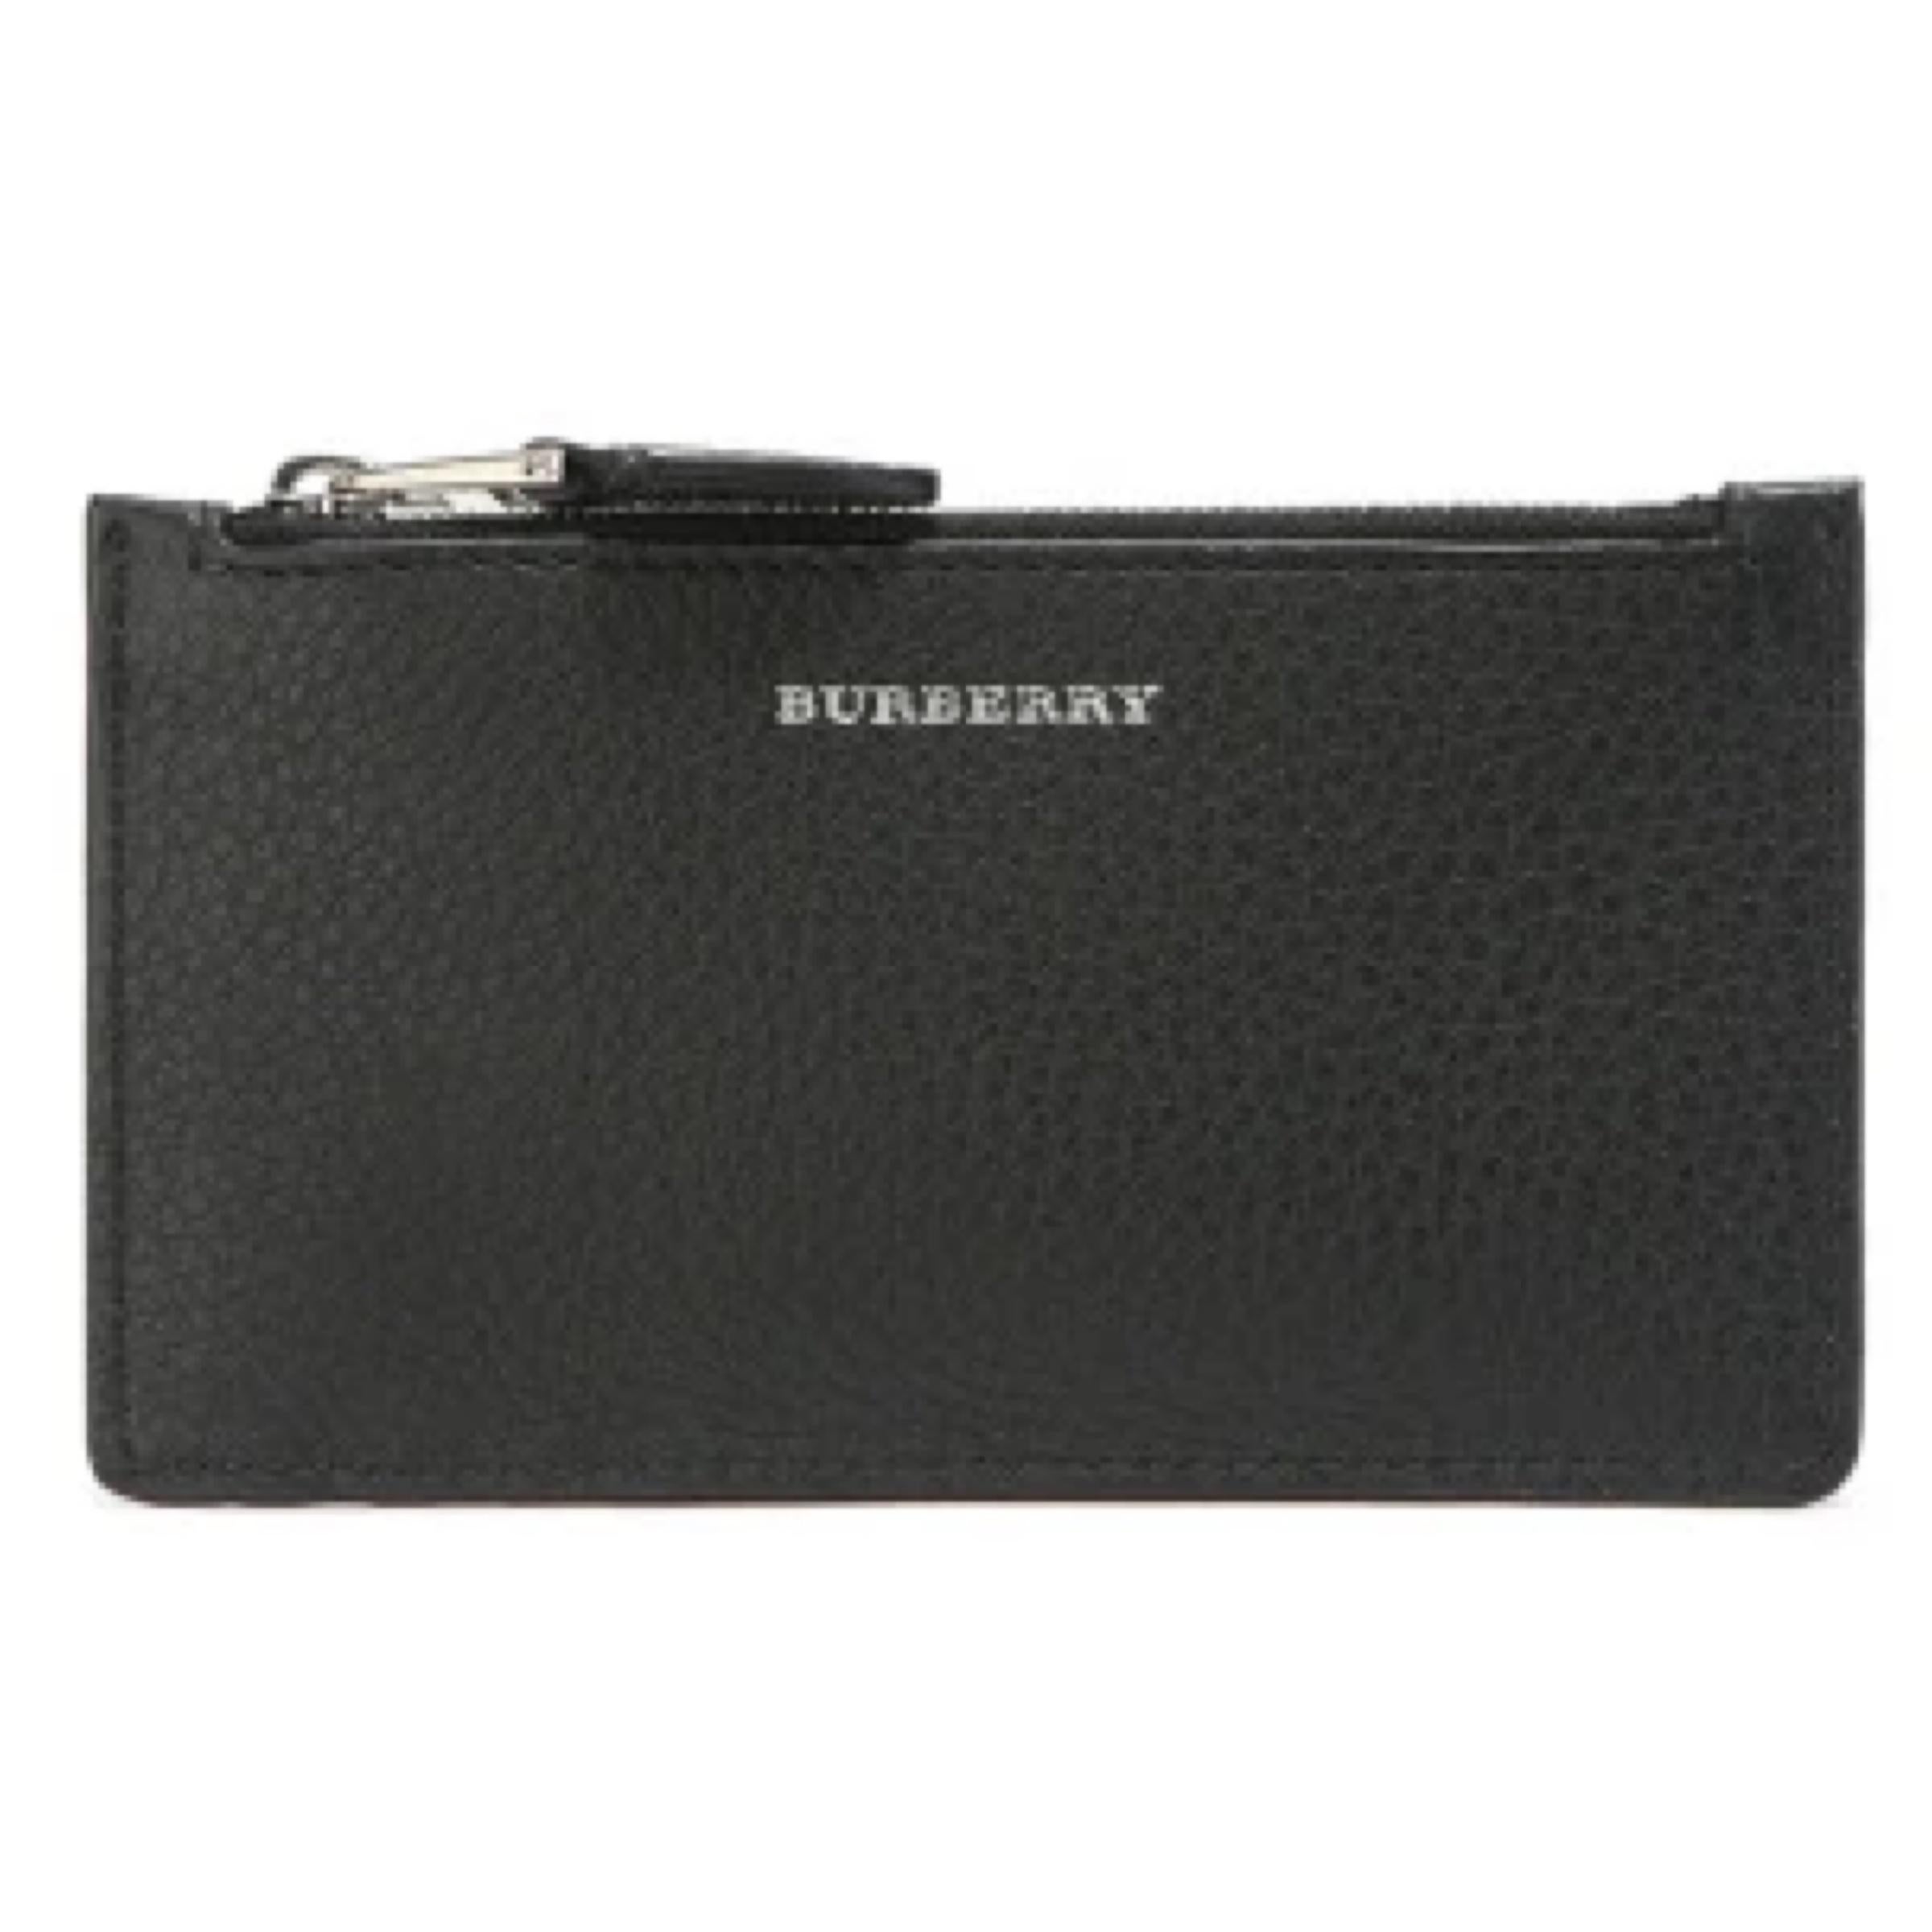 New Burberry Black Two-tone Zip Leather Card Holder Wallet

Authenticity Guaranteed

DETAILS
Brand: Burberry
Condition: Brand New
Color: Black/Green
Gender: Unisex
Material: Leather
1 zip main compartment
4 card slots
Embossed Burberry